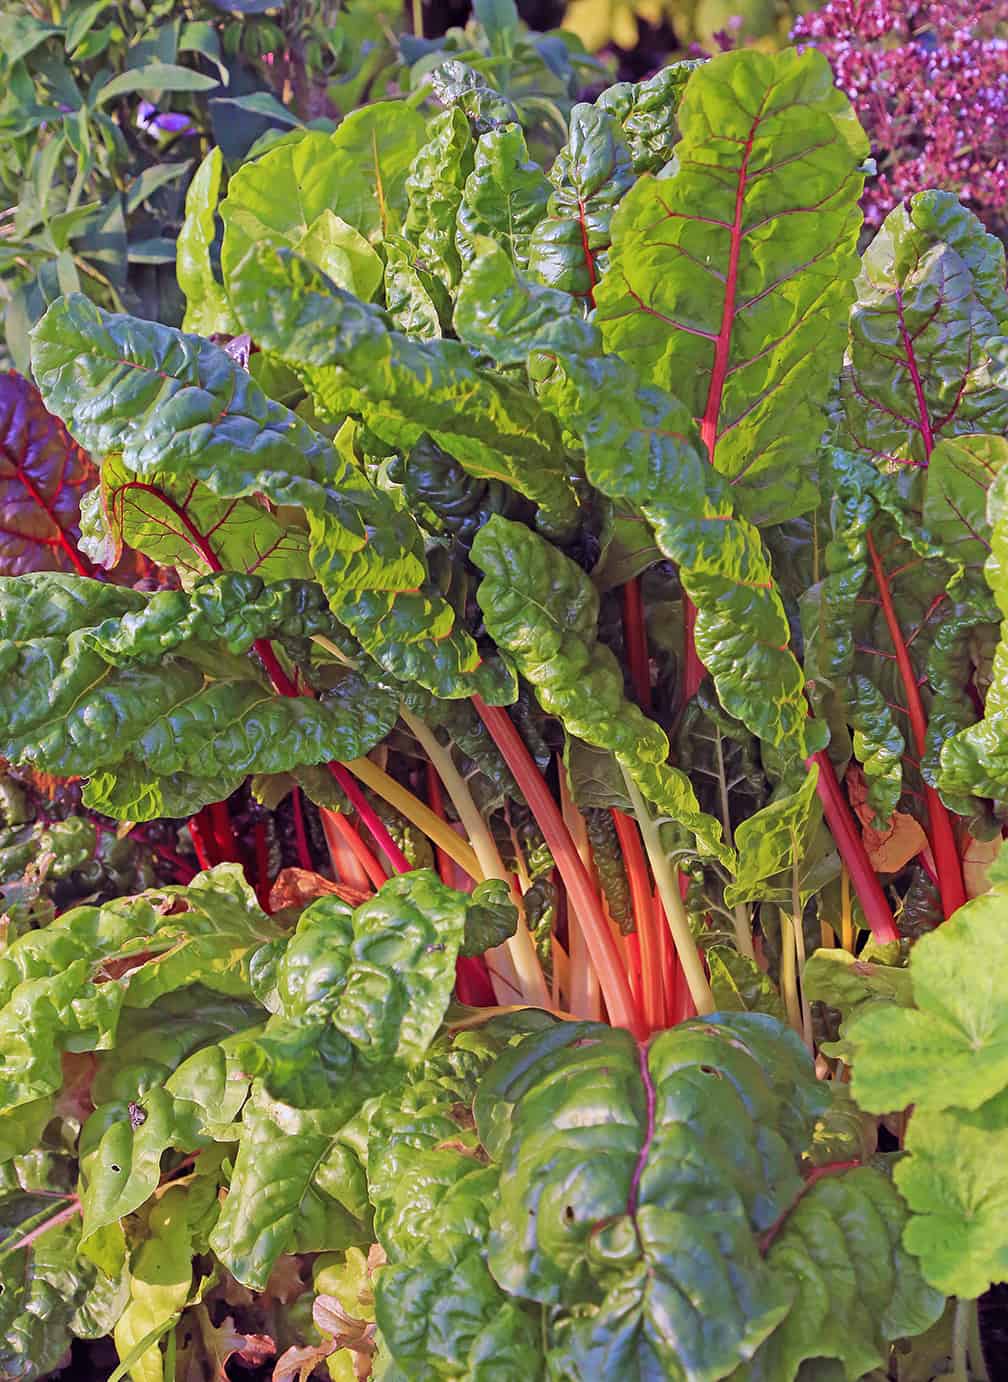 And as this photo shows, chard is also very ornamental. How can you NOT grow this plant???